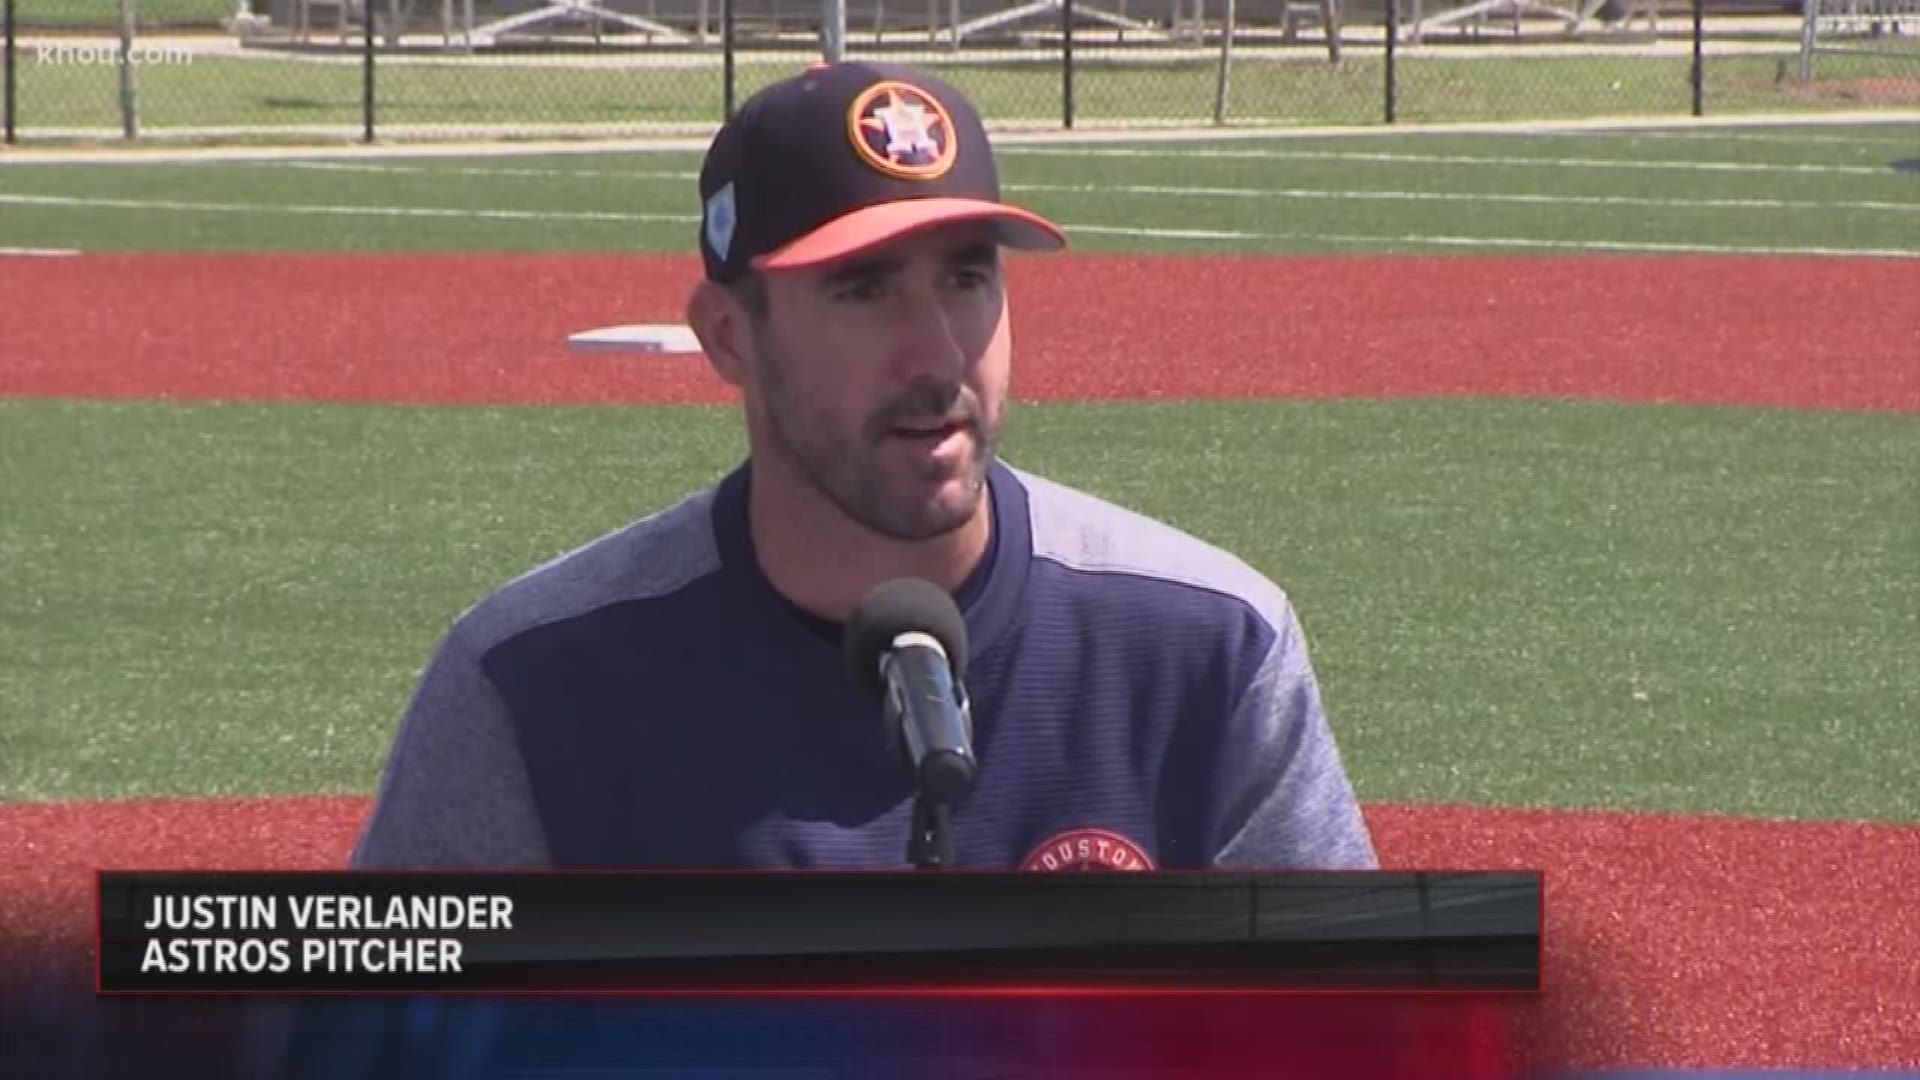 Astros ace pitcher Justin Verlander signed a three-year contract extension with the team.